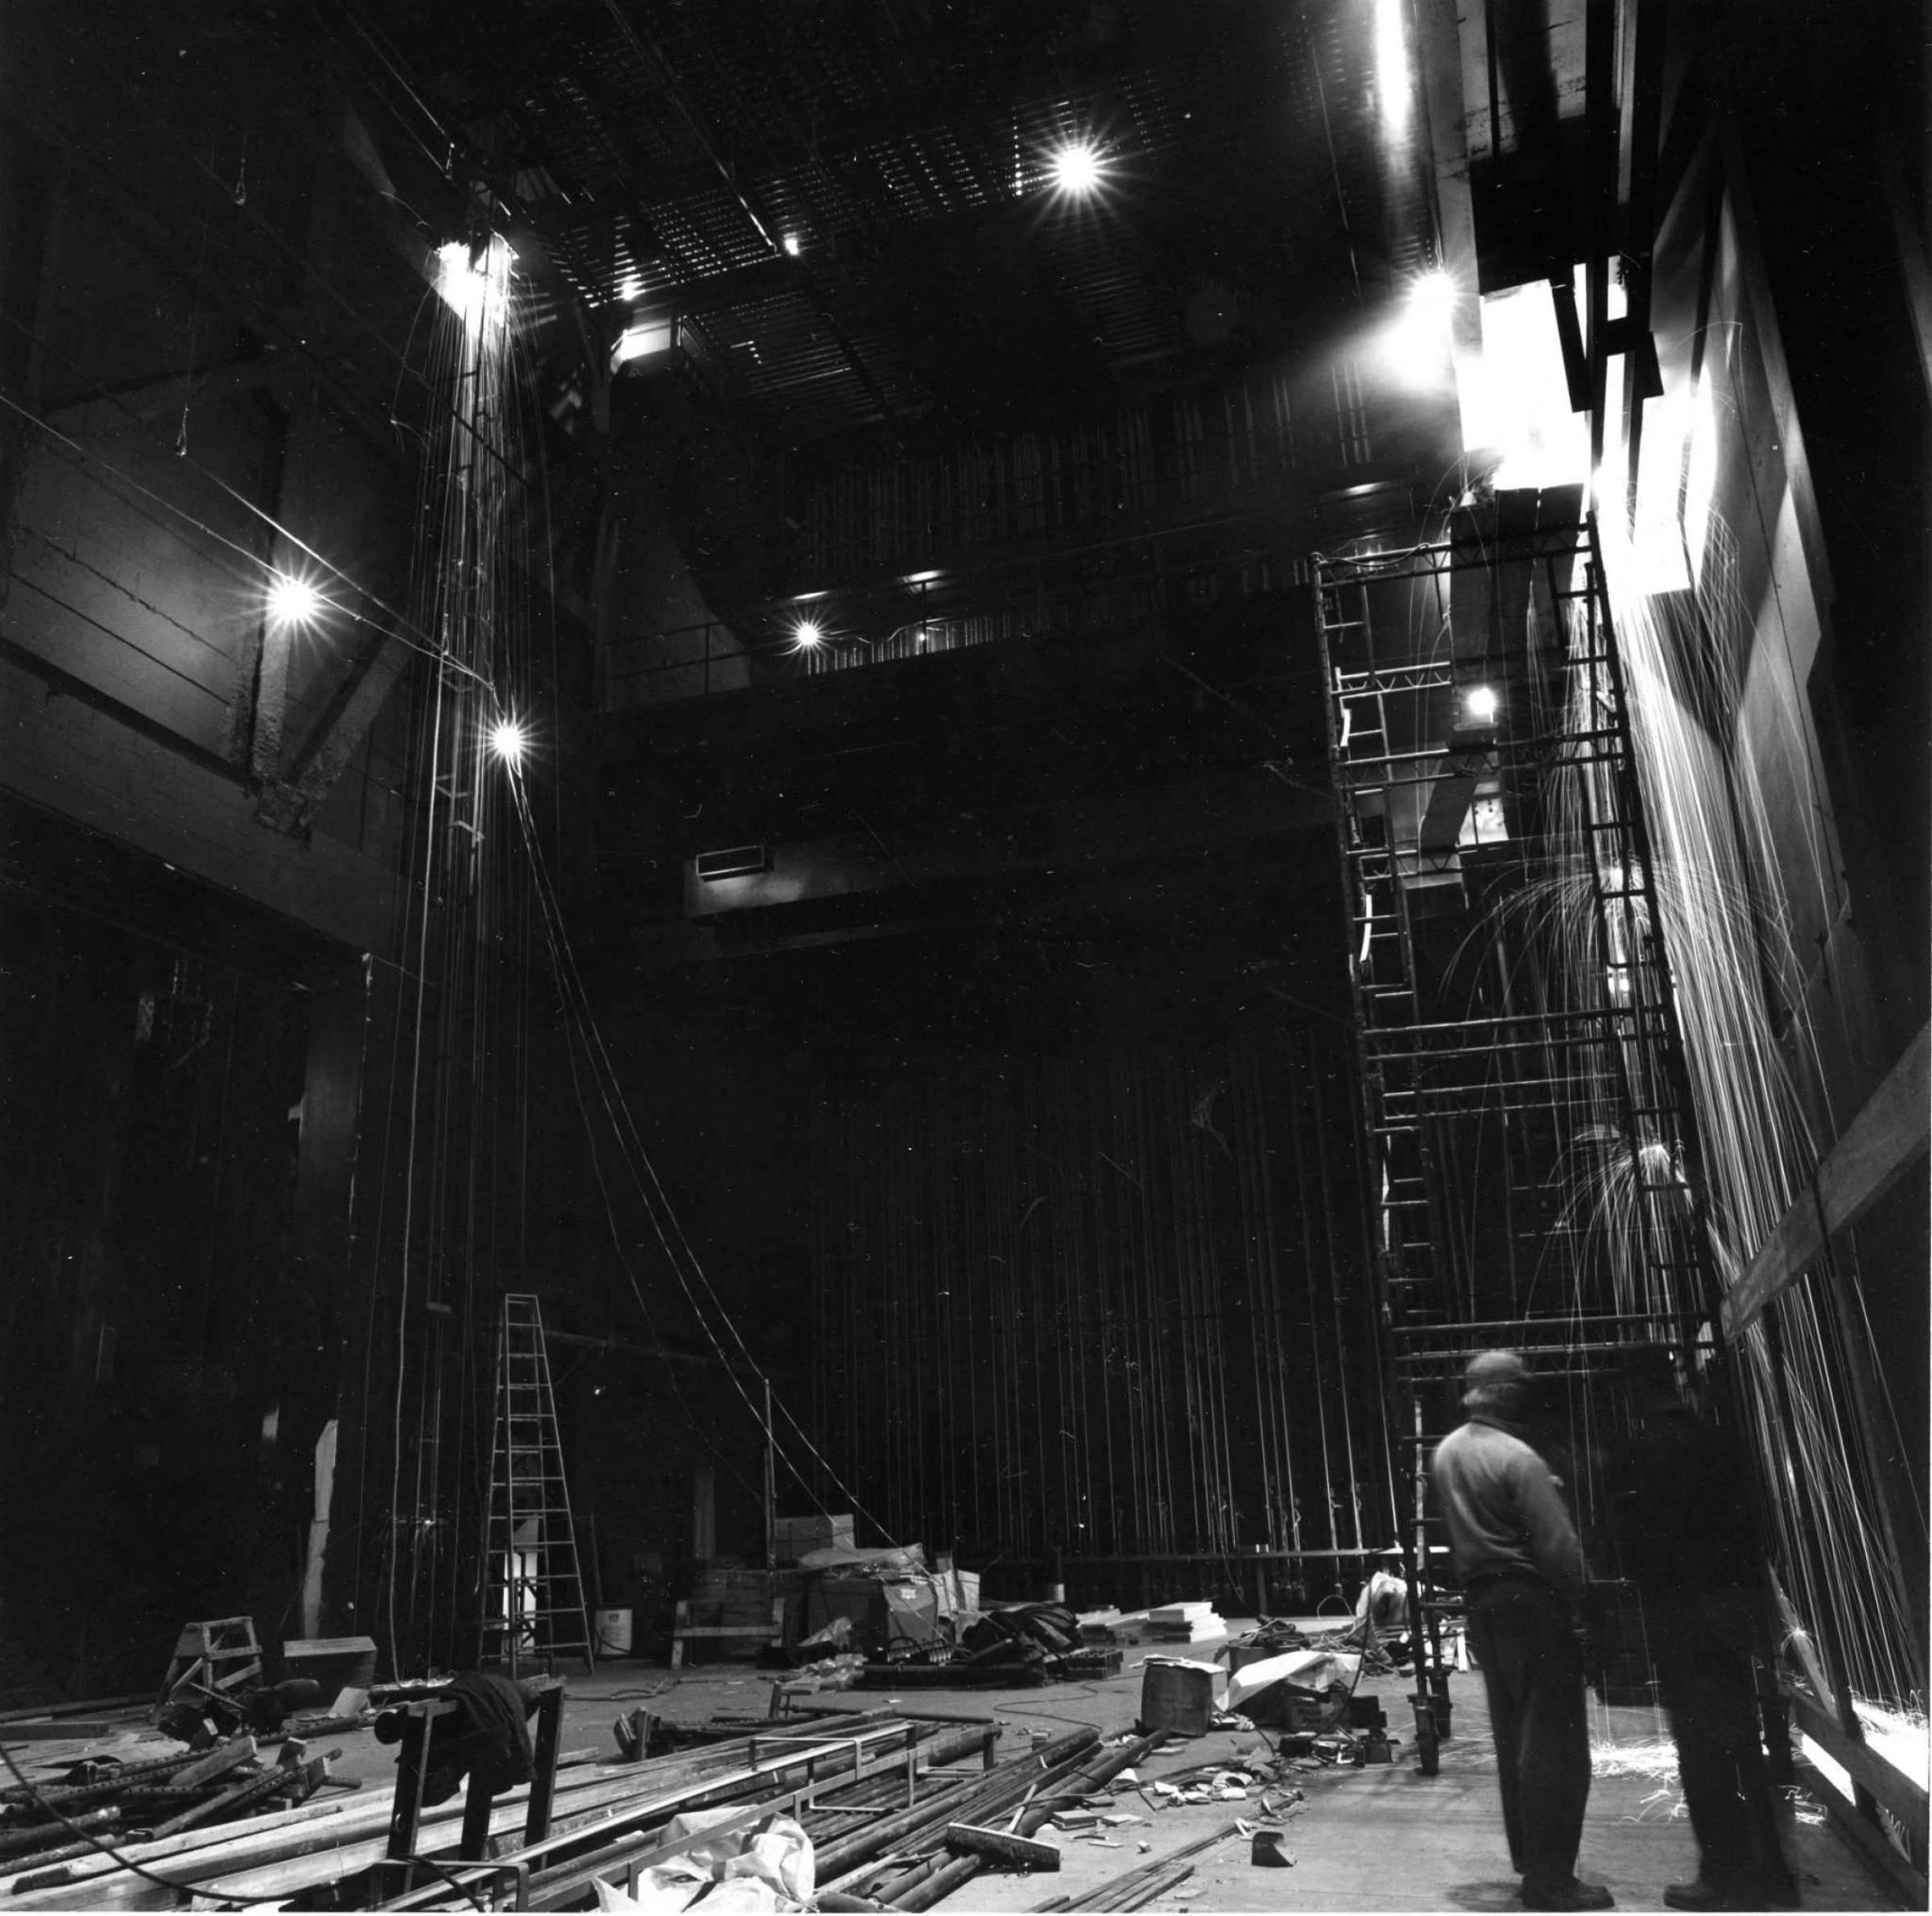 Main stage of PAC being constructed in 1969